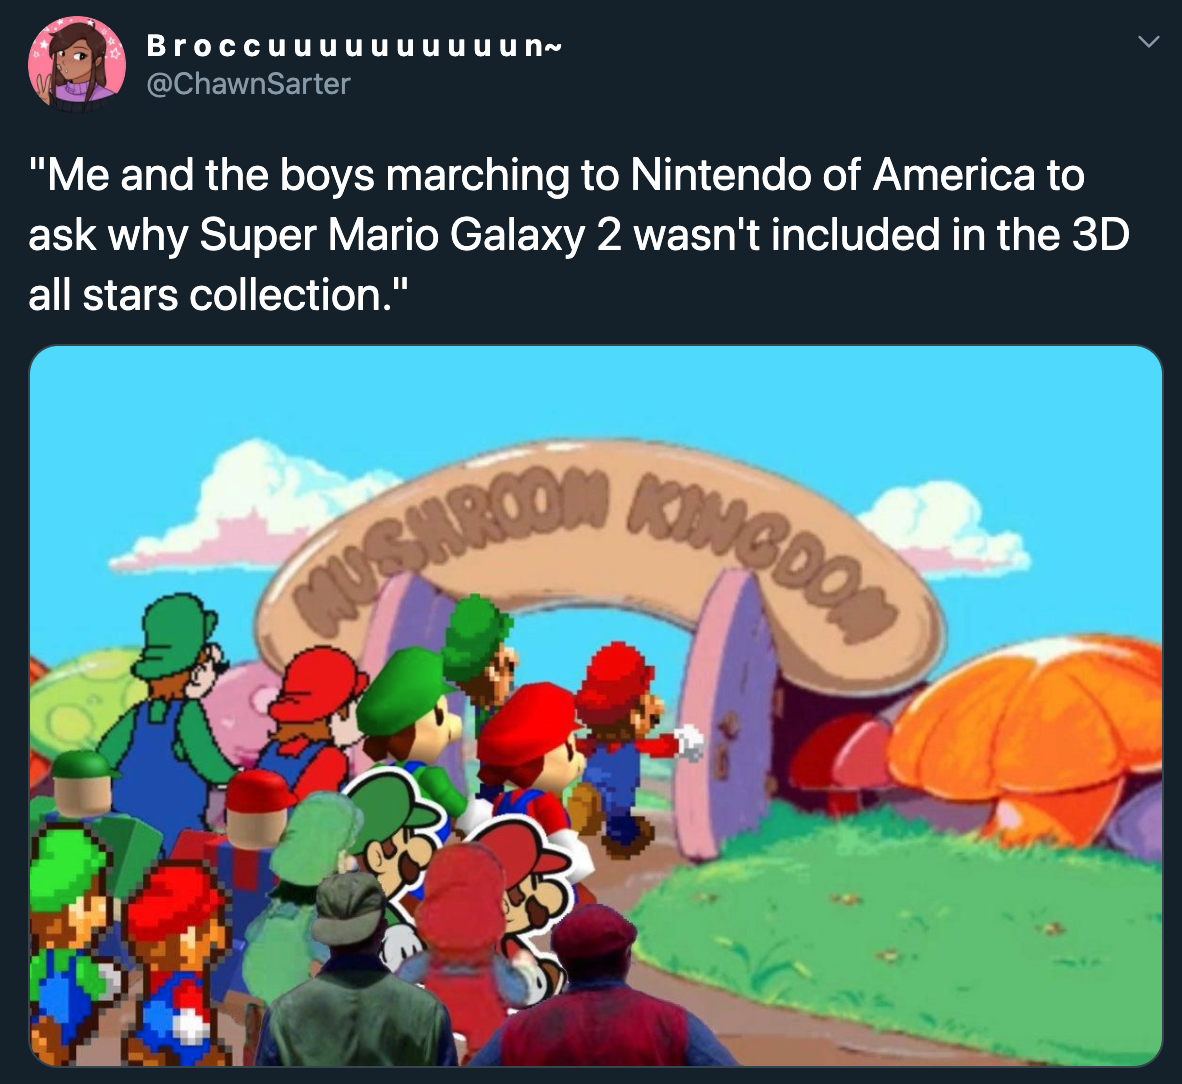 hotel mario - me and the boys marching to nintendo of america to ask why super mario galaxy 2 wasn't included in the 3d all stars collection